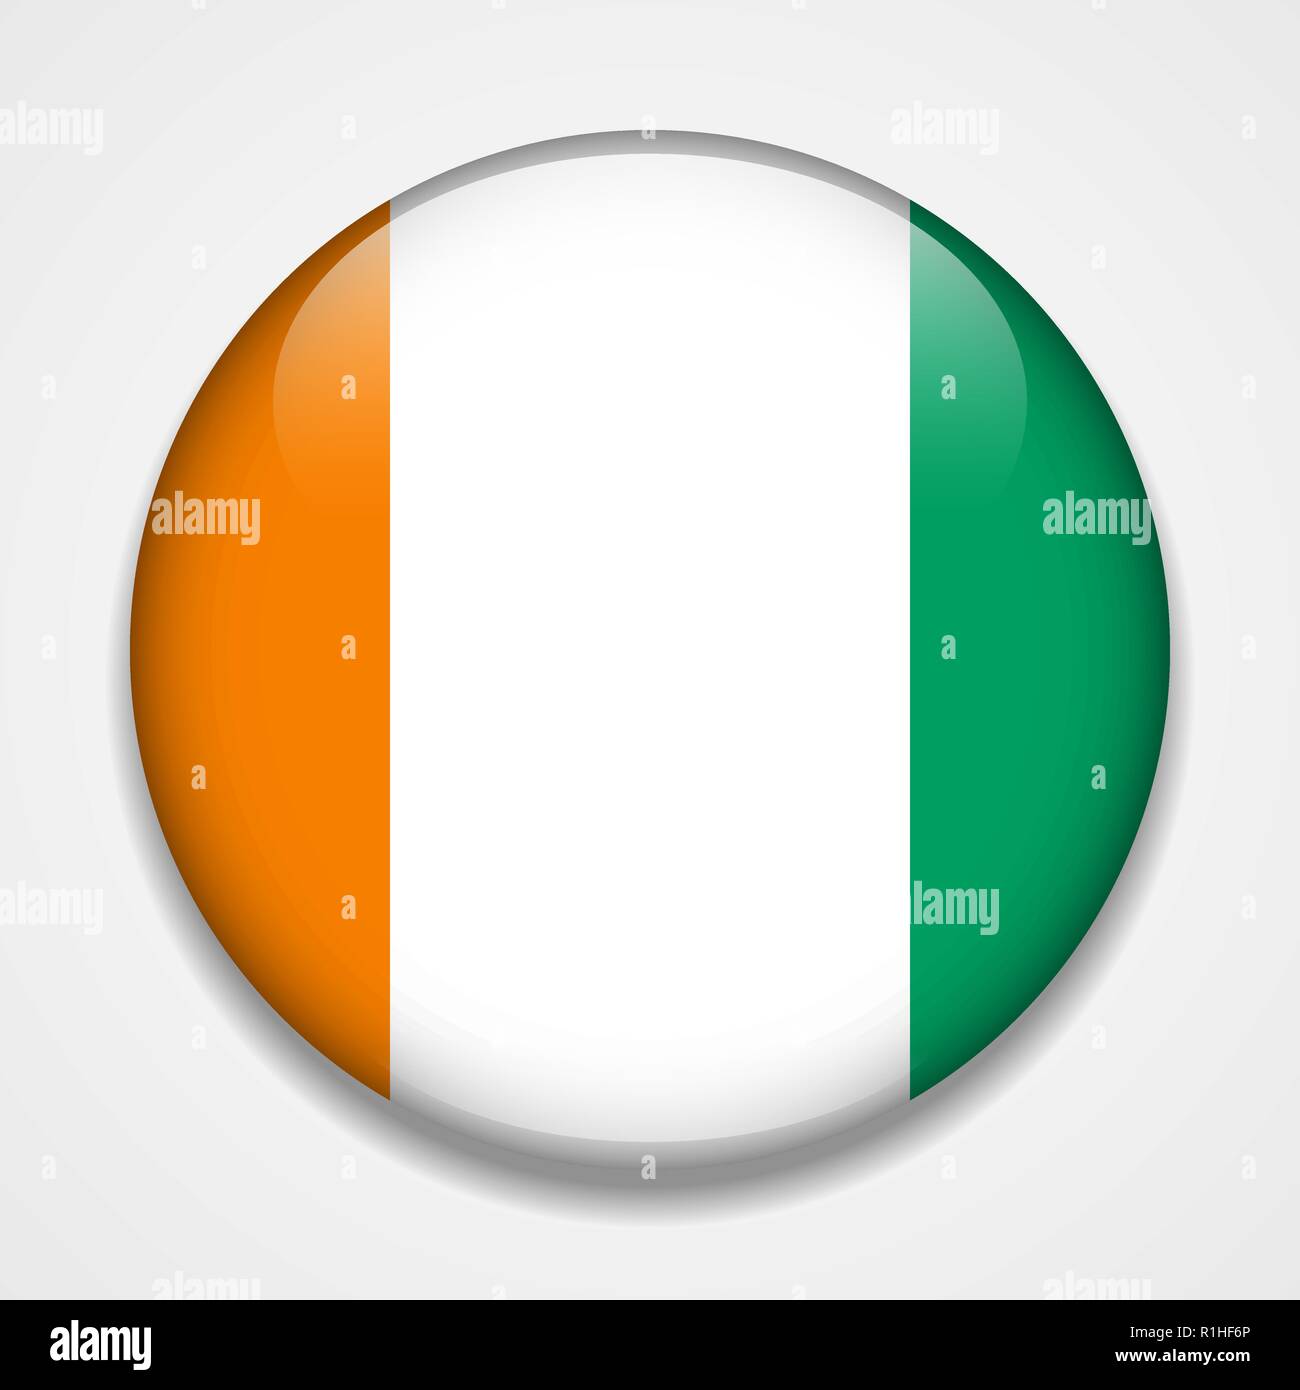 Round flag of Cote D'Ivoire Stock Photo - Alamy